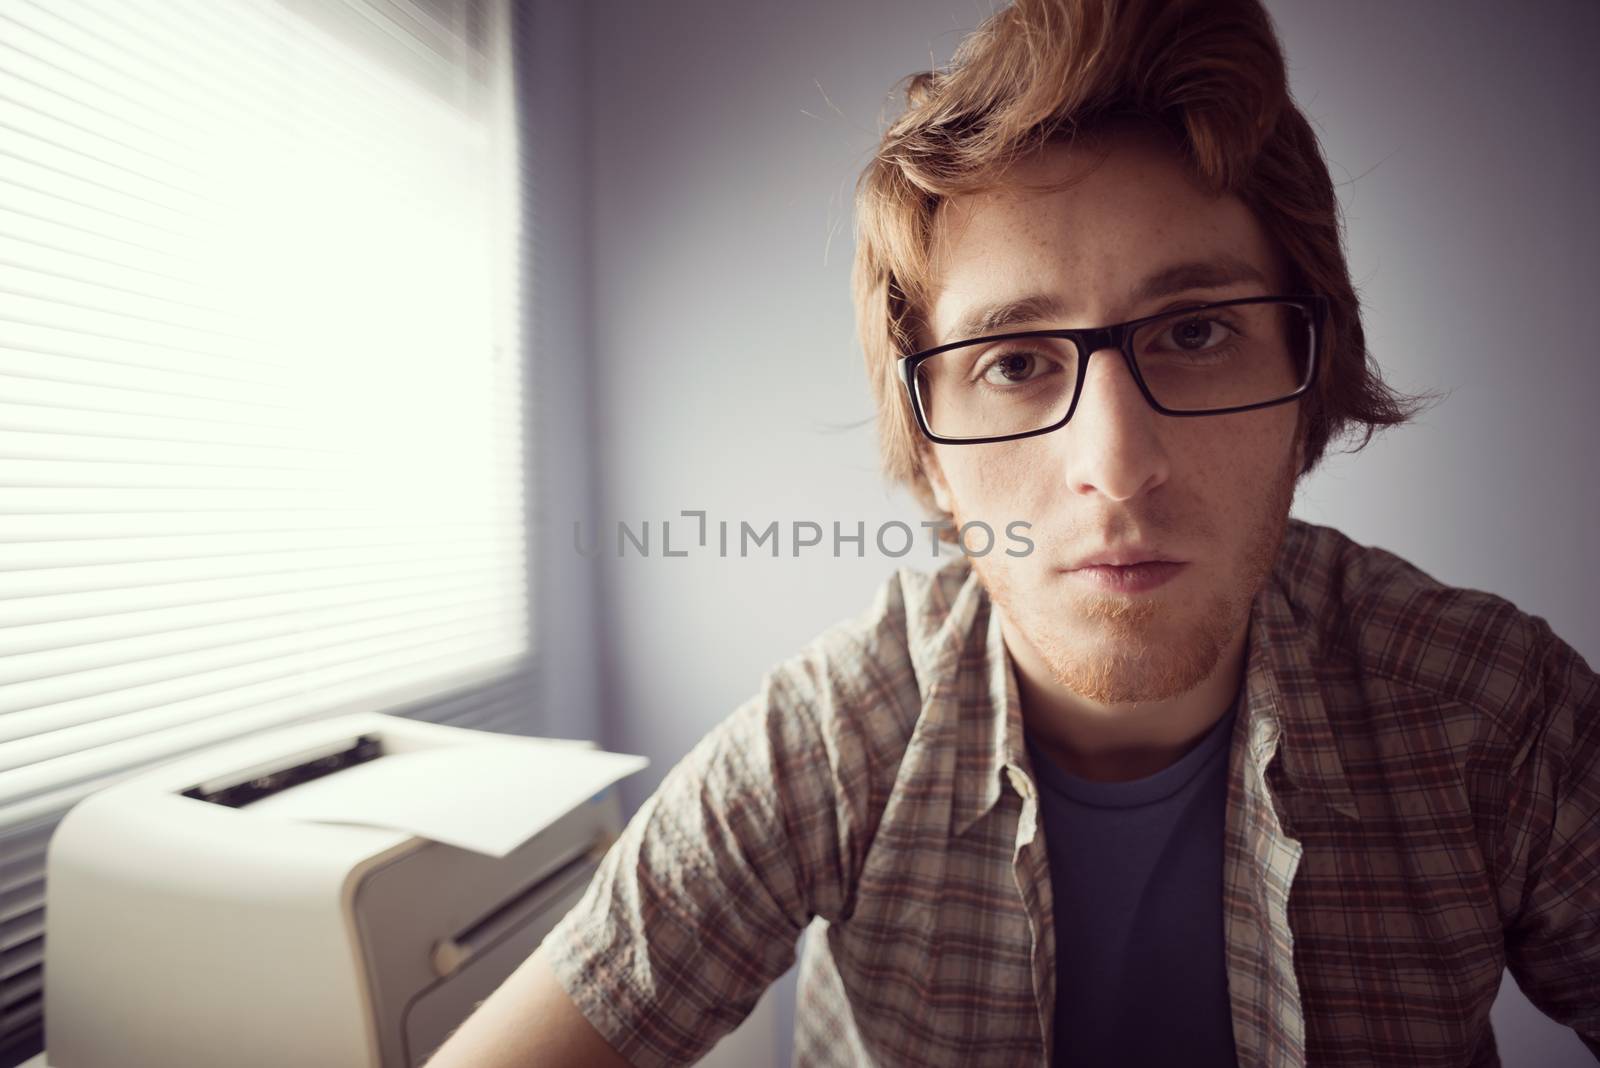 Young nerd guy staring at monitor with pensive expression.